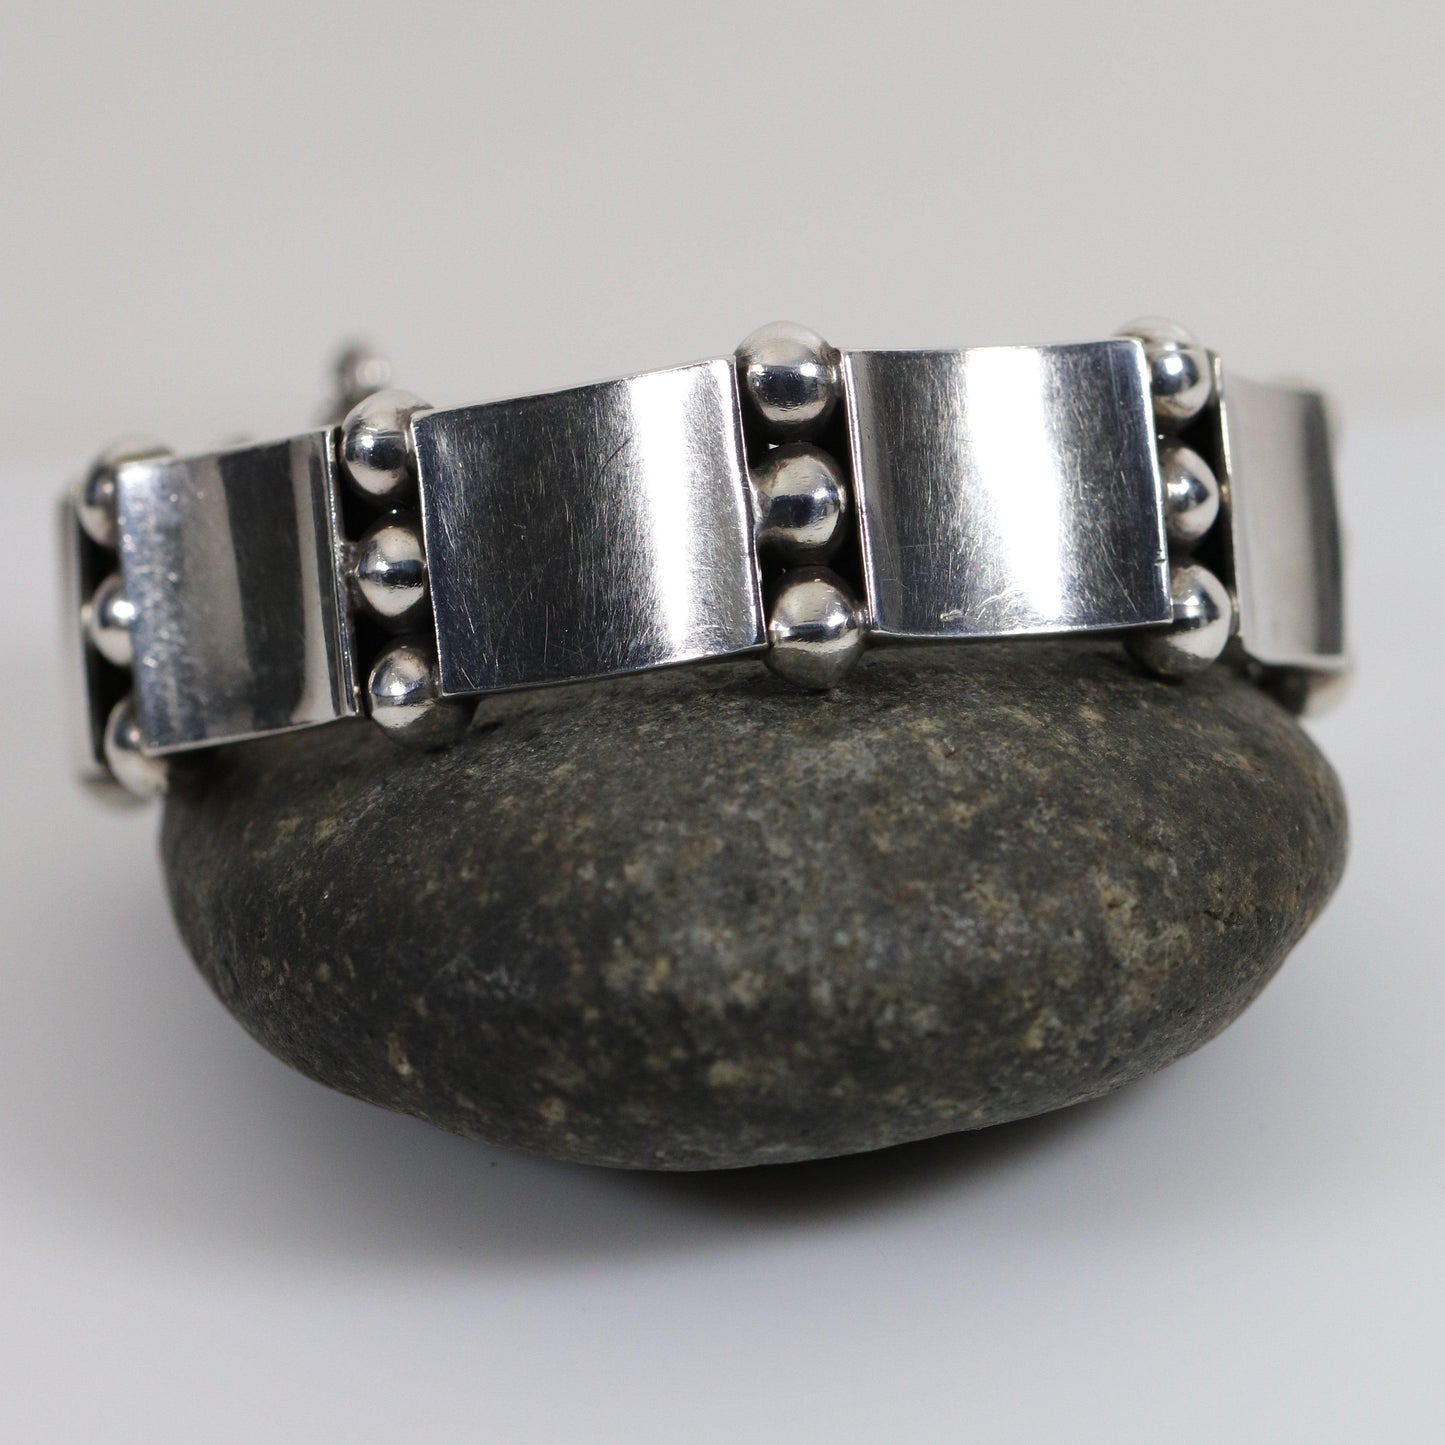 Vintage Hector Aguilar Taxco Jewelry | Concave Panel and Ball Handcrafted Bracelet Mexico - Carmel Fine Silver Jewelry